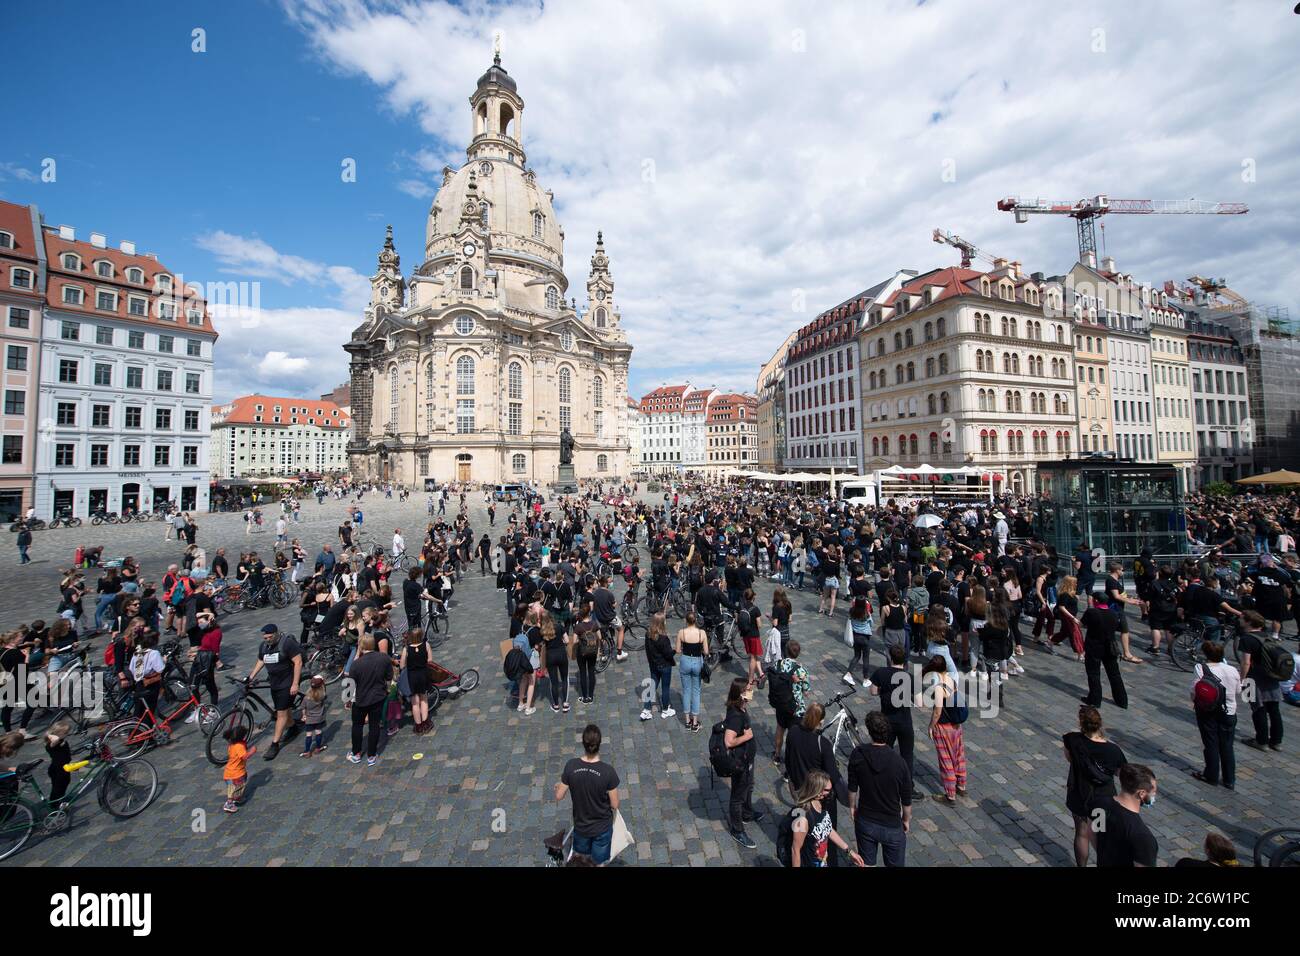 Dresden, Germany. 12th July, 2020. Participants in a demonstration against racism stand in front of the Frauenkirche on Neumarkt square. The rally of the 'Black Lives Matter Dresden' group wants to draw attention to structural racism after the violent death of George Floyd. Credit: Sebastian Kahnert/dpa-Zentralbild/dpa/Alamy Live News Stock Photo